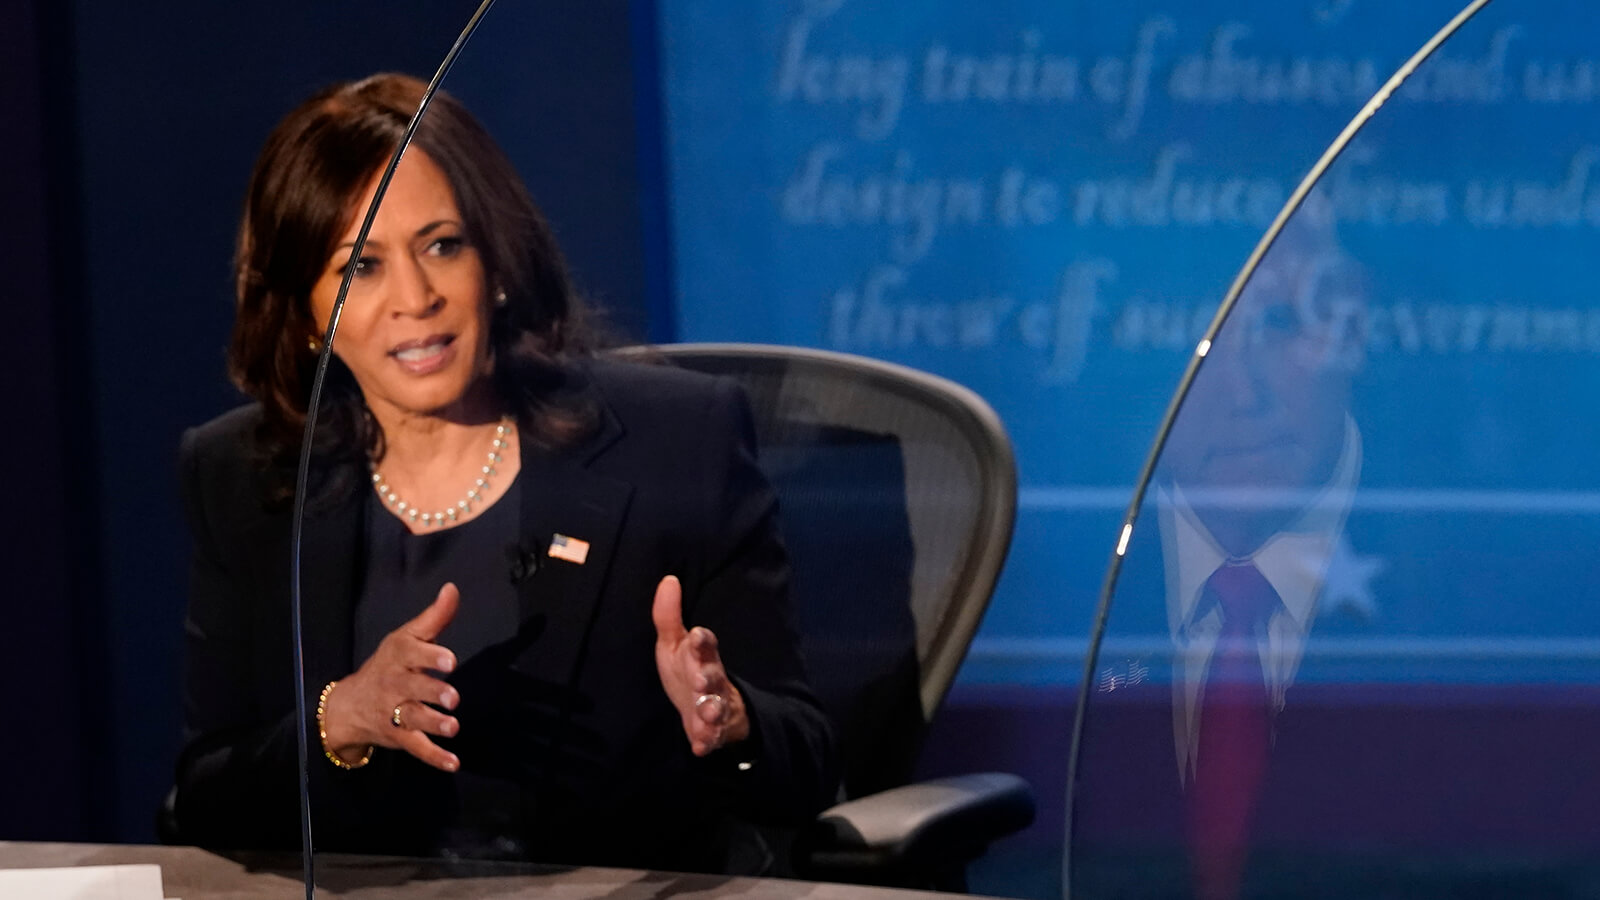 VP debate affirms why Biden, Harris are the right choices for America’s families